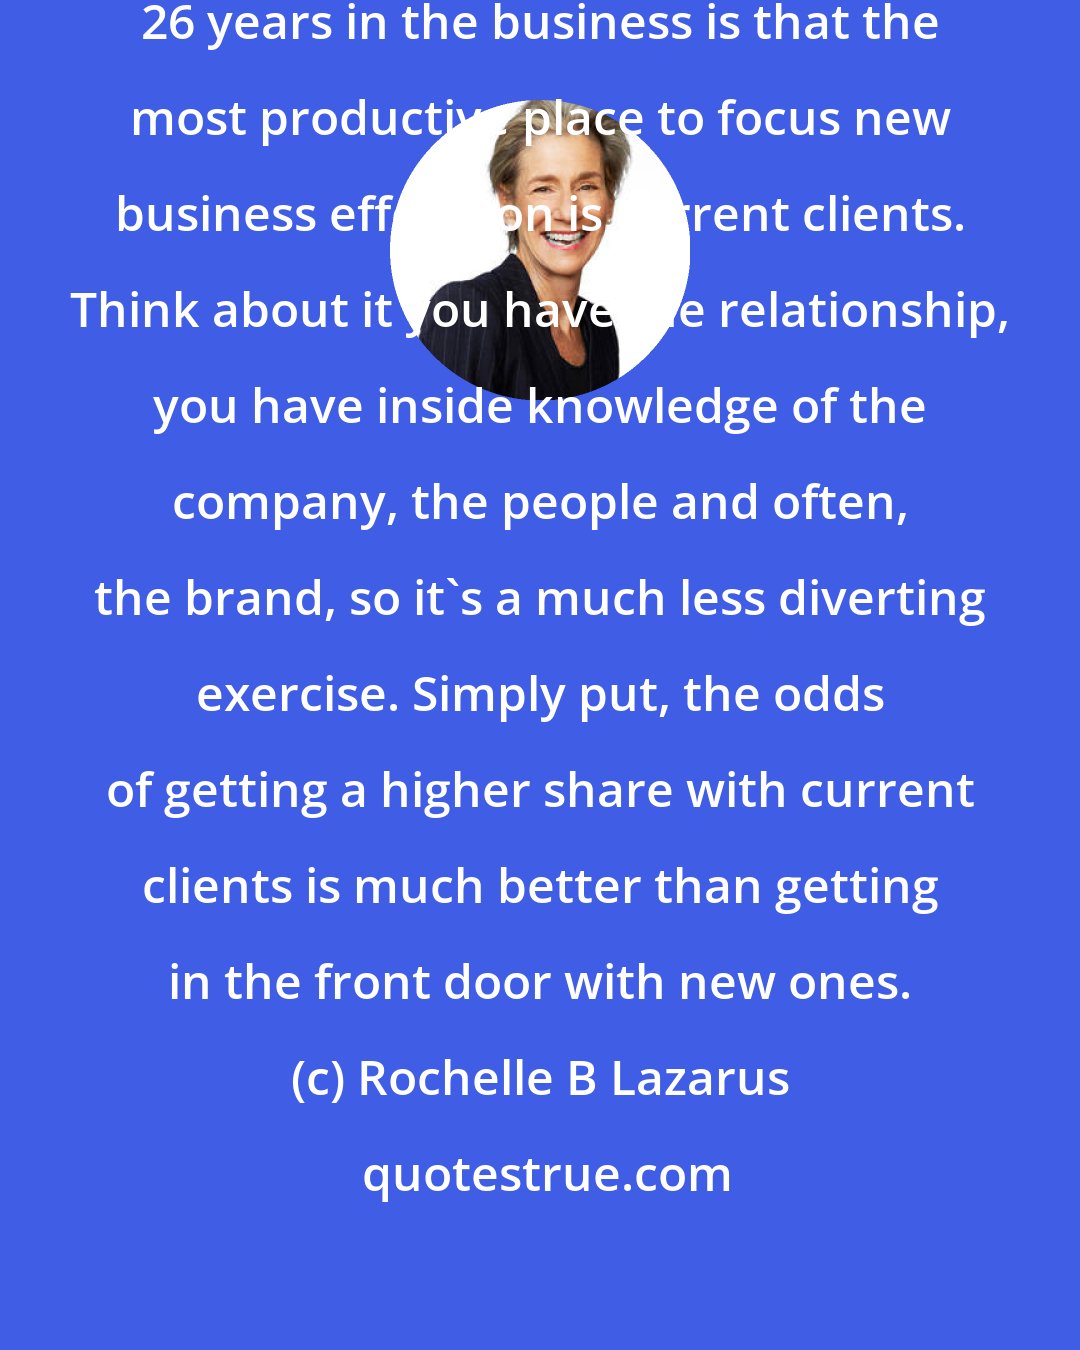 Rochelle B Lazarus: One of the things I have learned over 26 years in the business is that the most productive place to focus new business efforts on is current clients. Think about it you have the relationship, you have inside knowledge of the company, the people and often, the brand, so it's a much less diverting exercise. Simply put, the odds of getting a higher share with current clients is much better than getting in the front door with new ones.